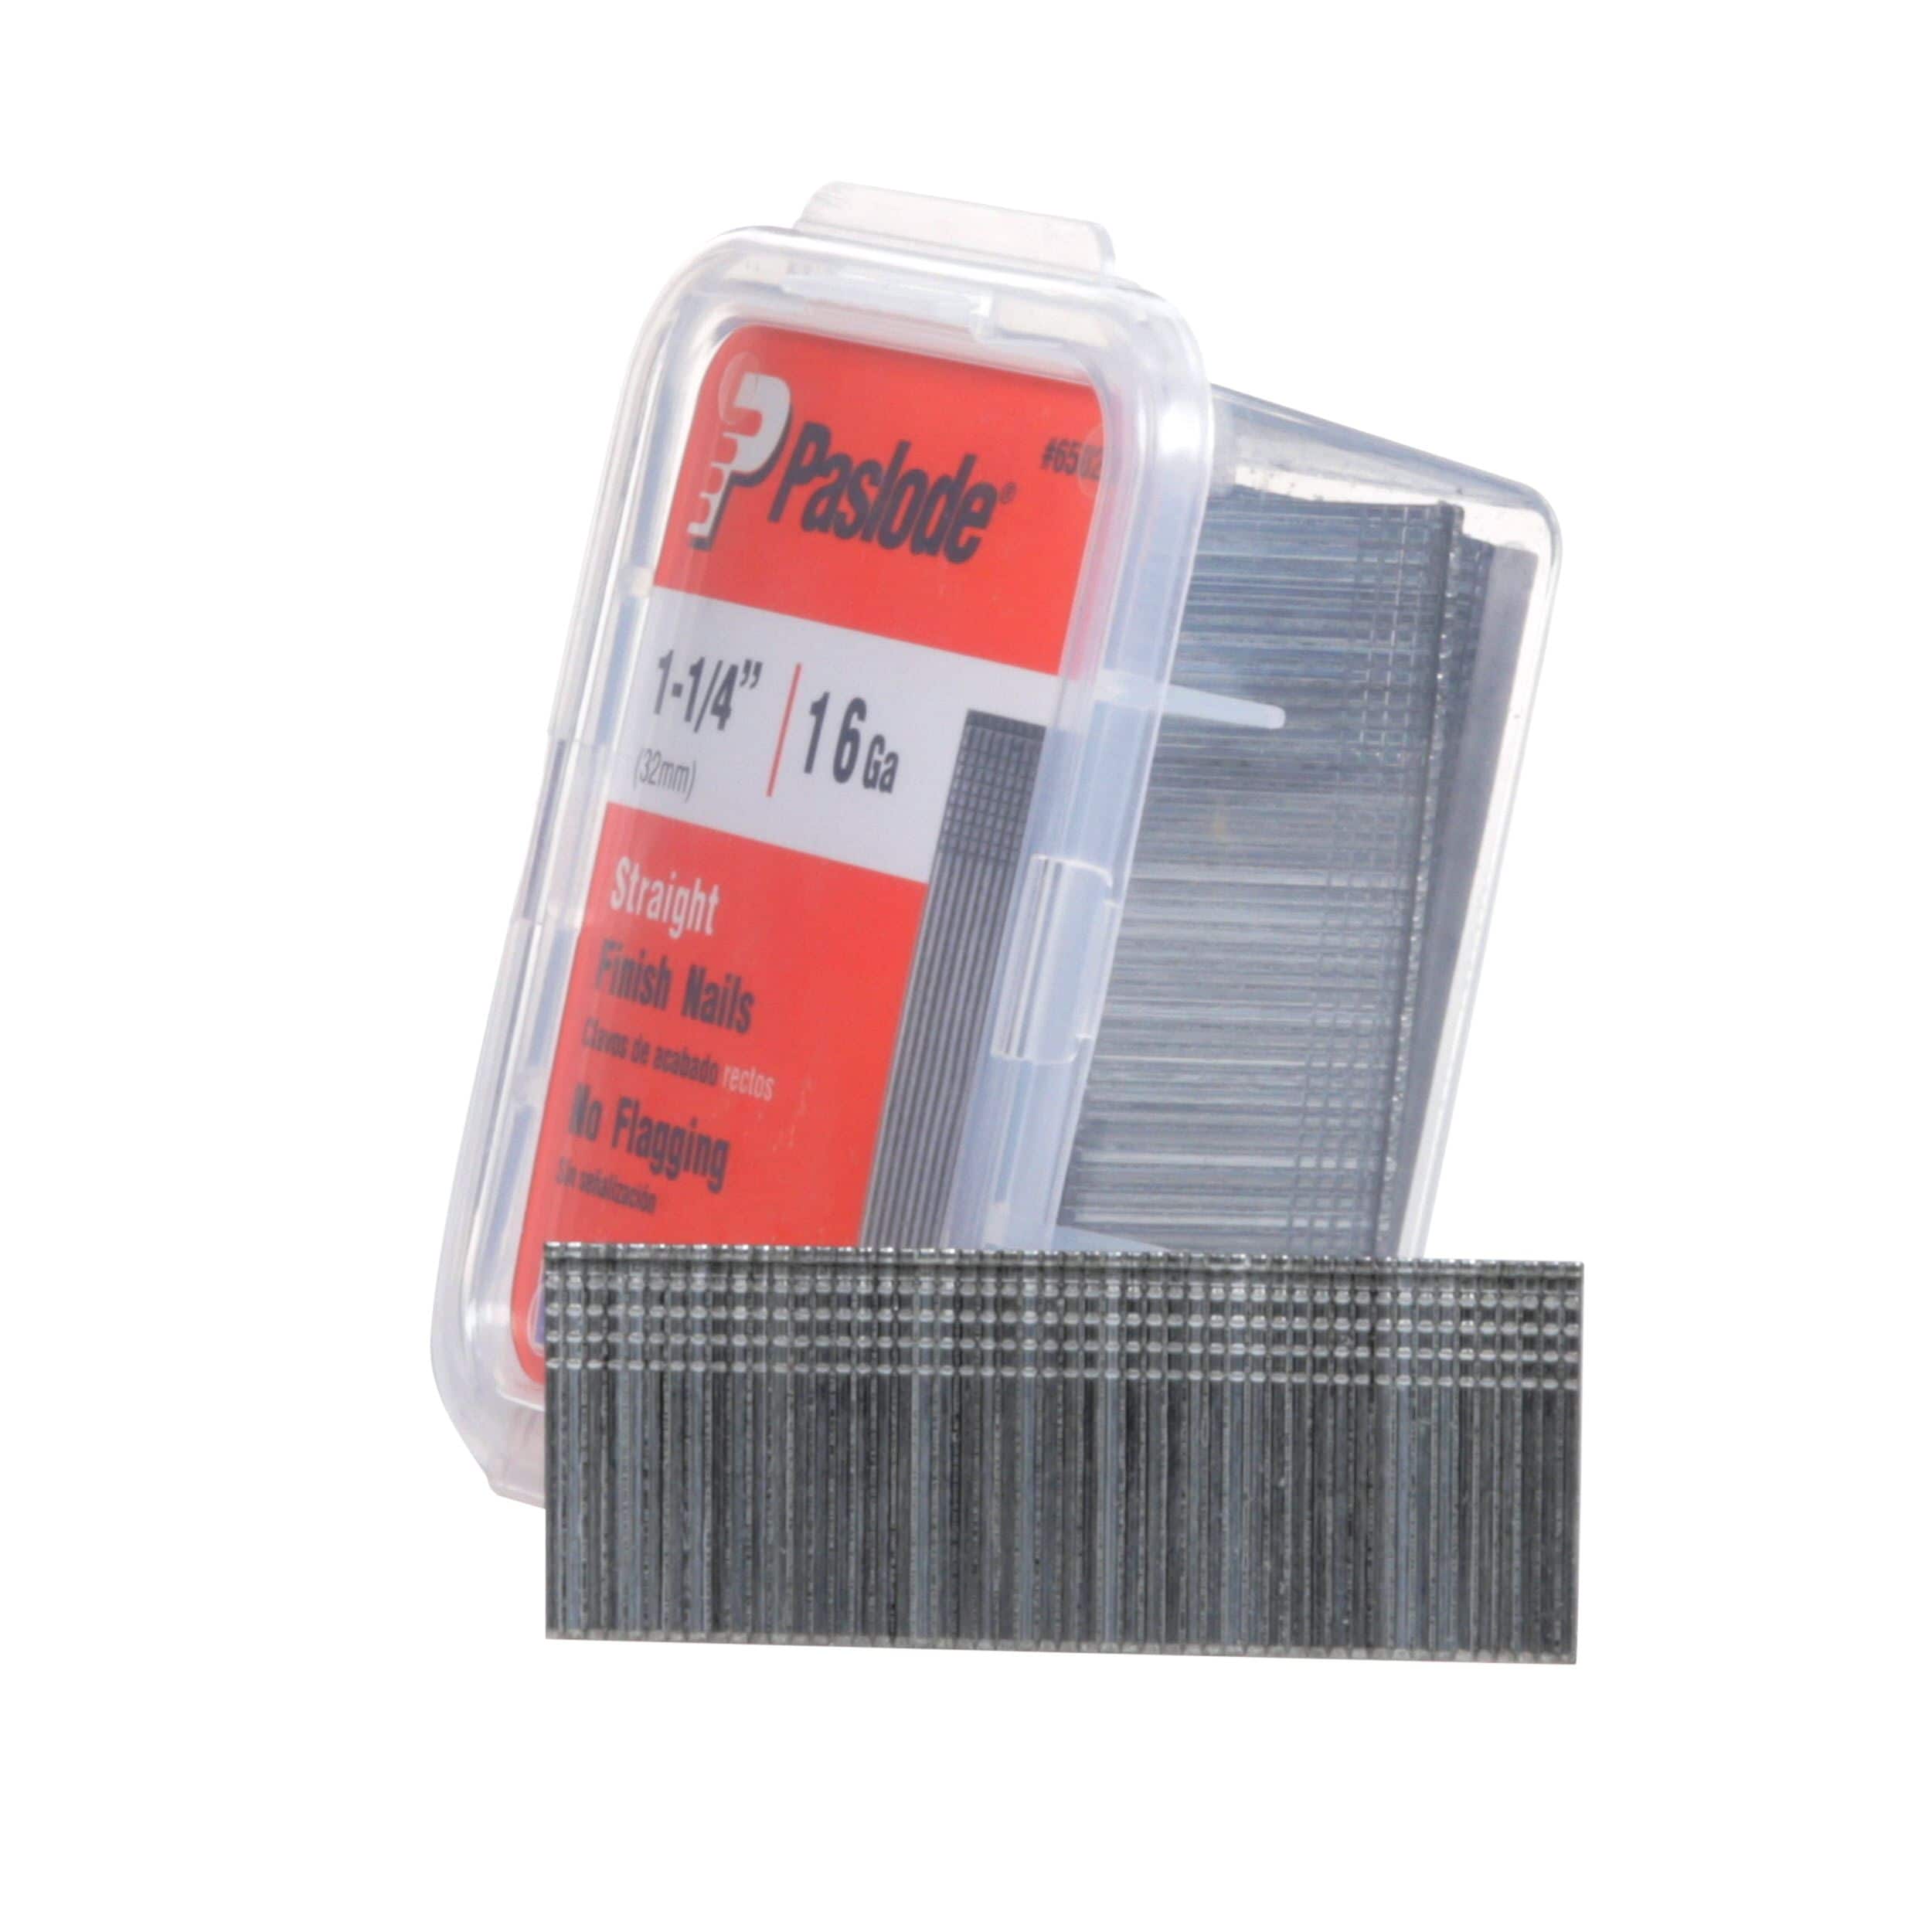 PASLODE 1-1/4" STRAIGHT FINISH NAILS 404057 18 GAUGE 5,000/BX NEW